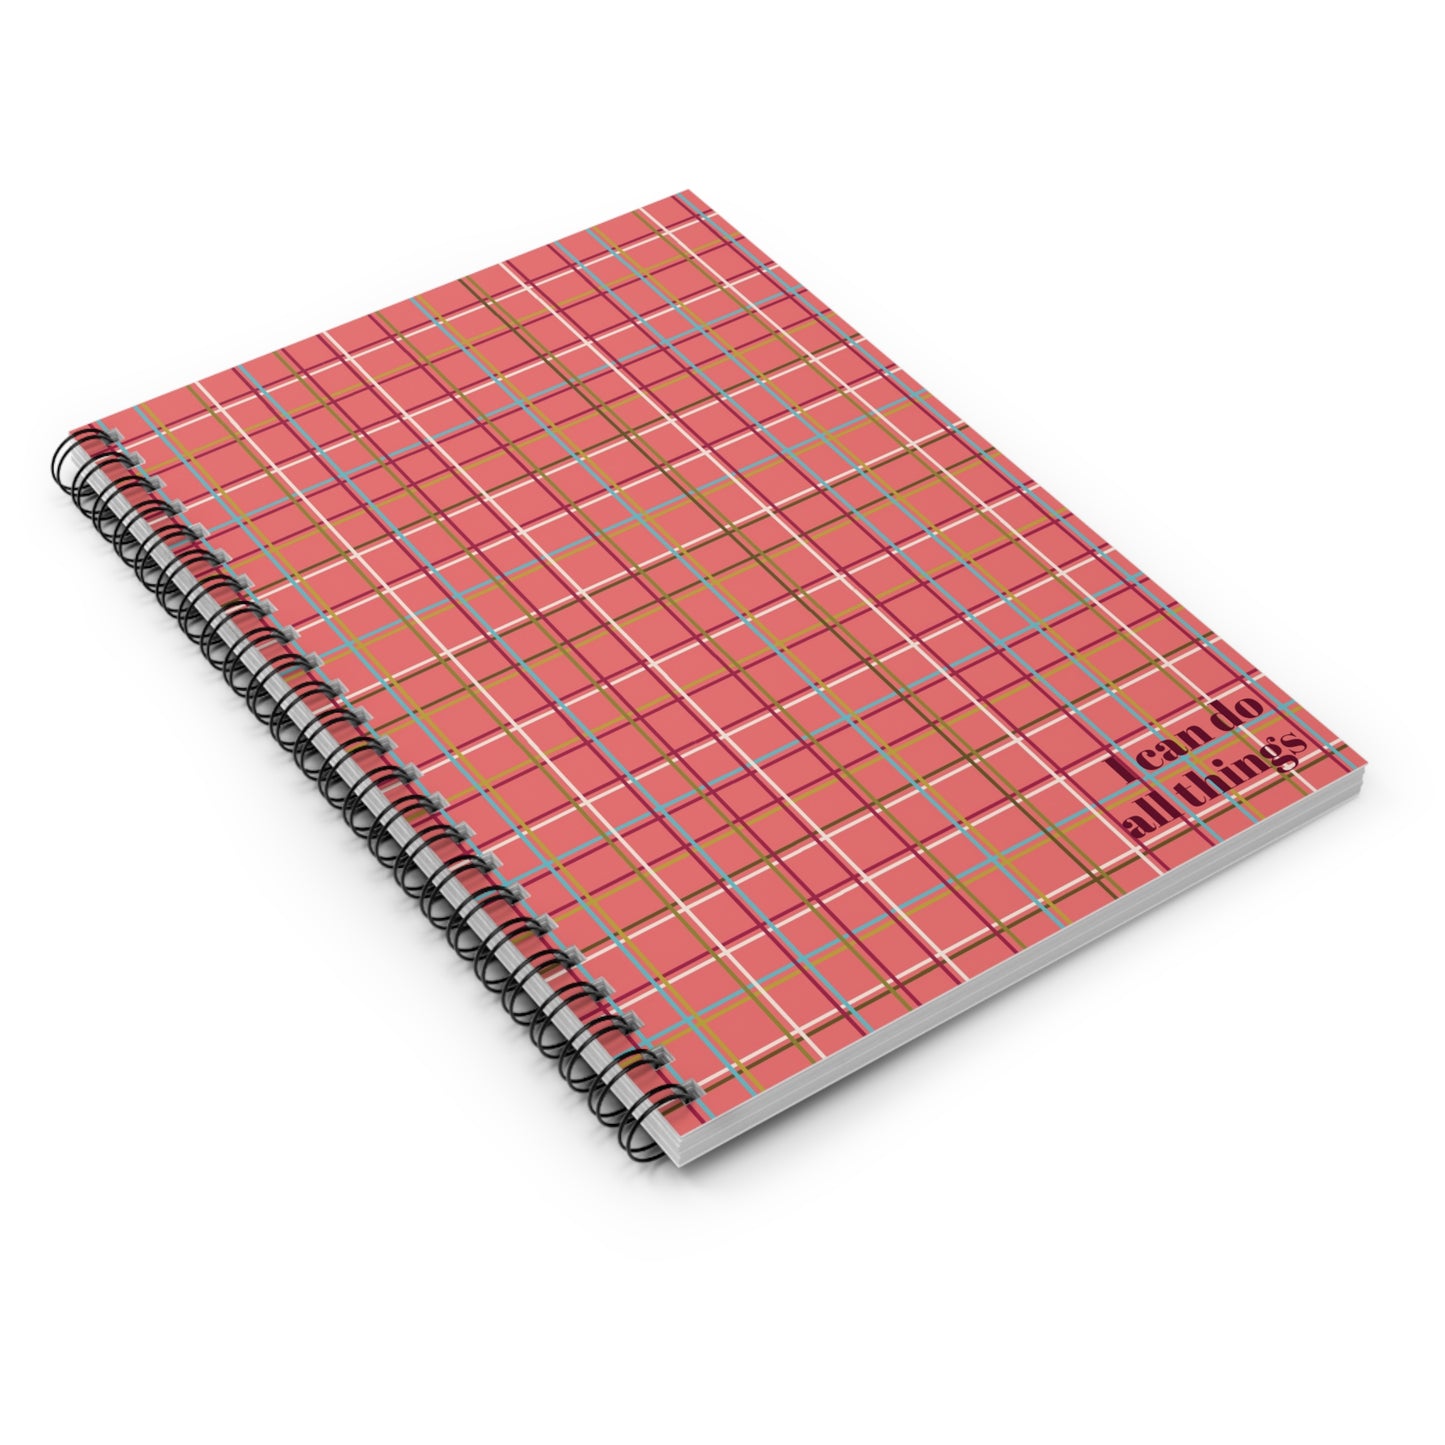 Fleeting Peach Plaid Notebook - Ruled Line "I can do all things"